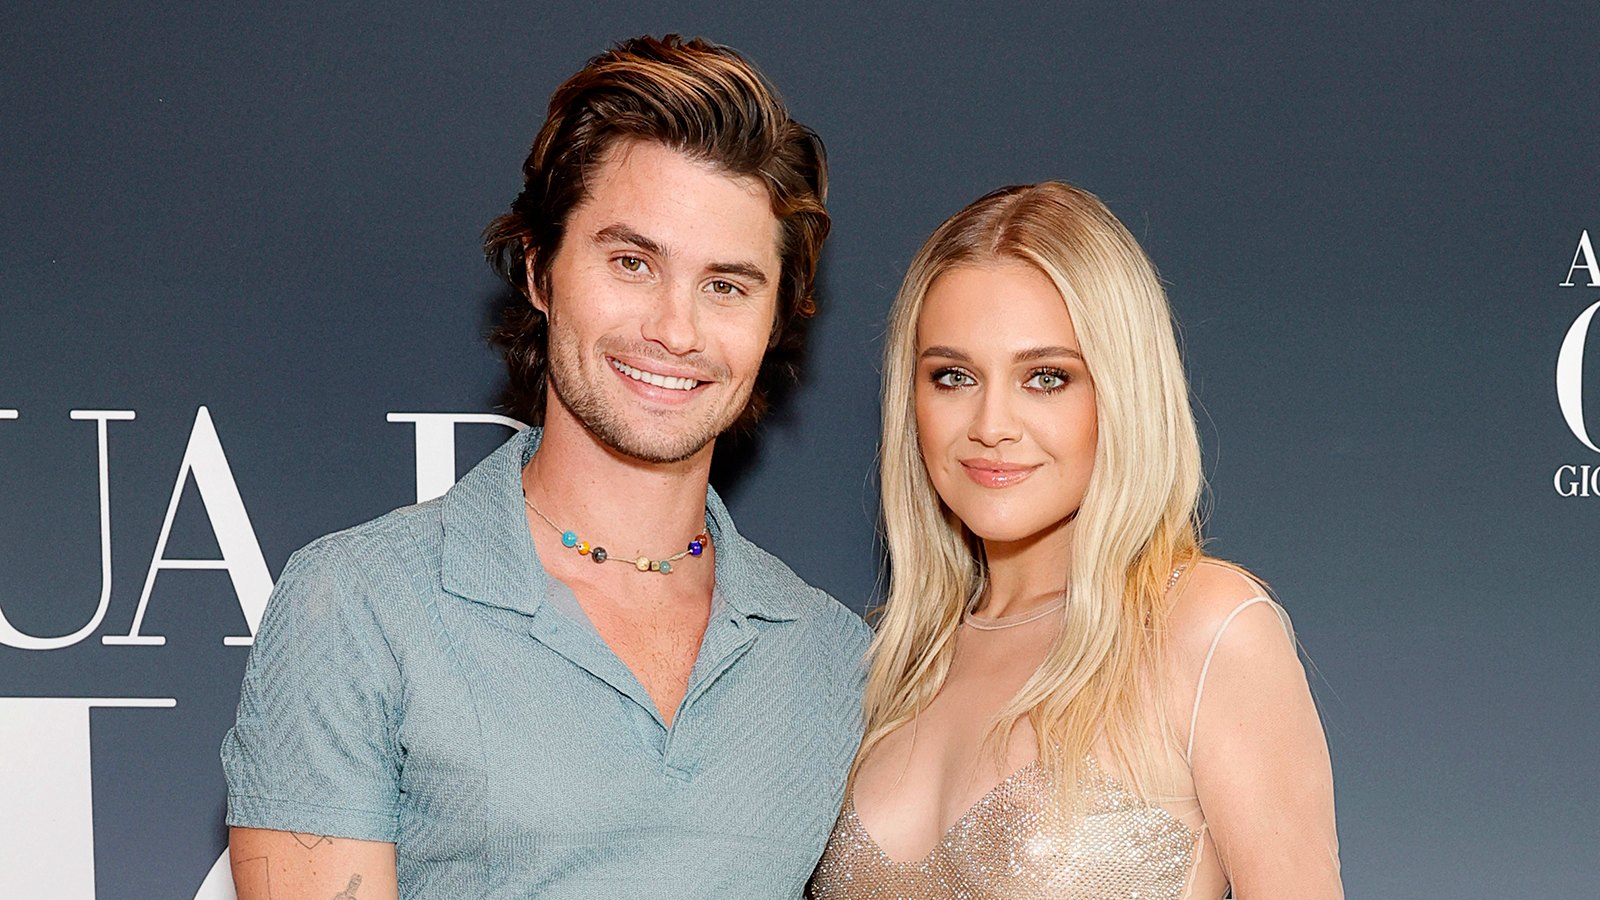 Chase Stokes Had the Perfect Reply When Kelsea Ballerini Slid into His DMs